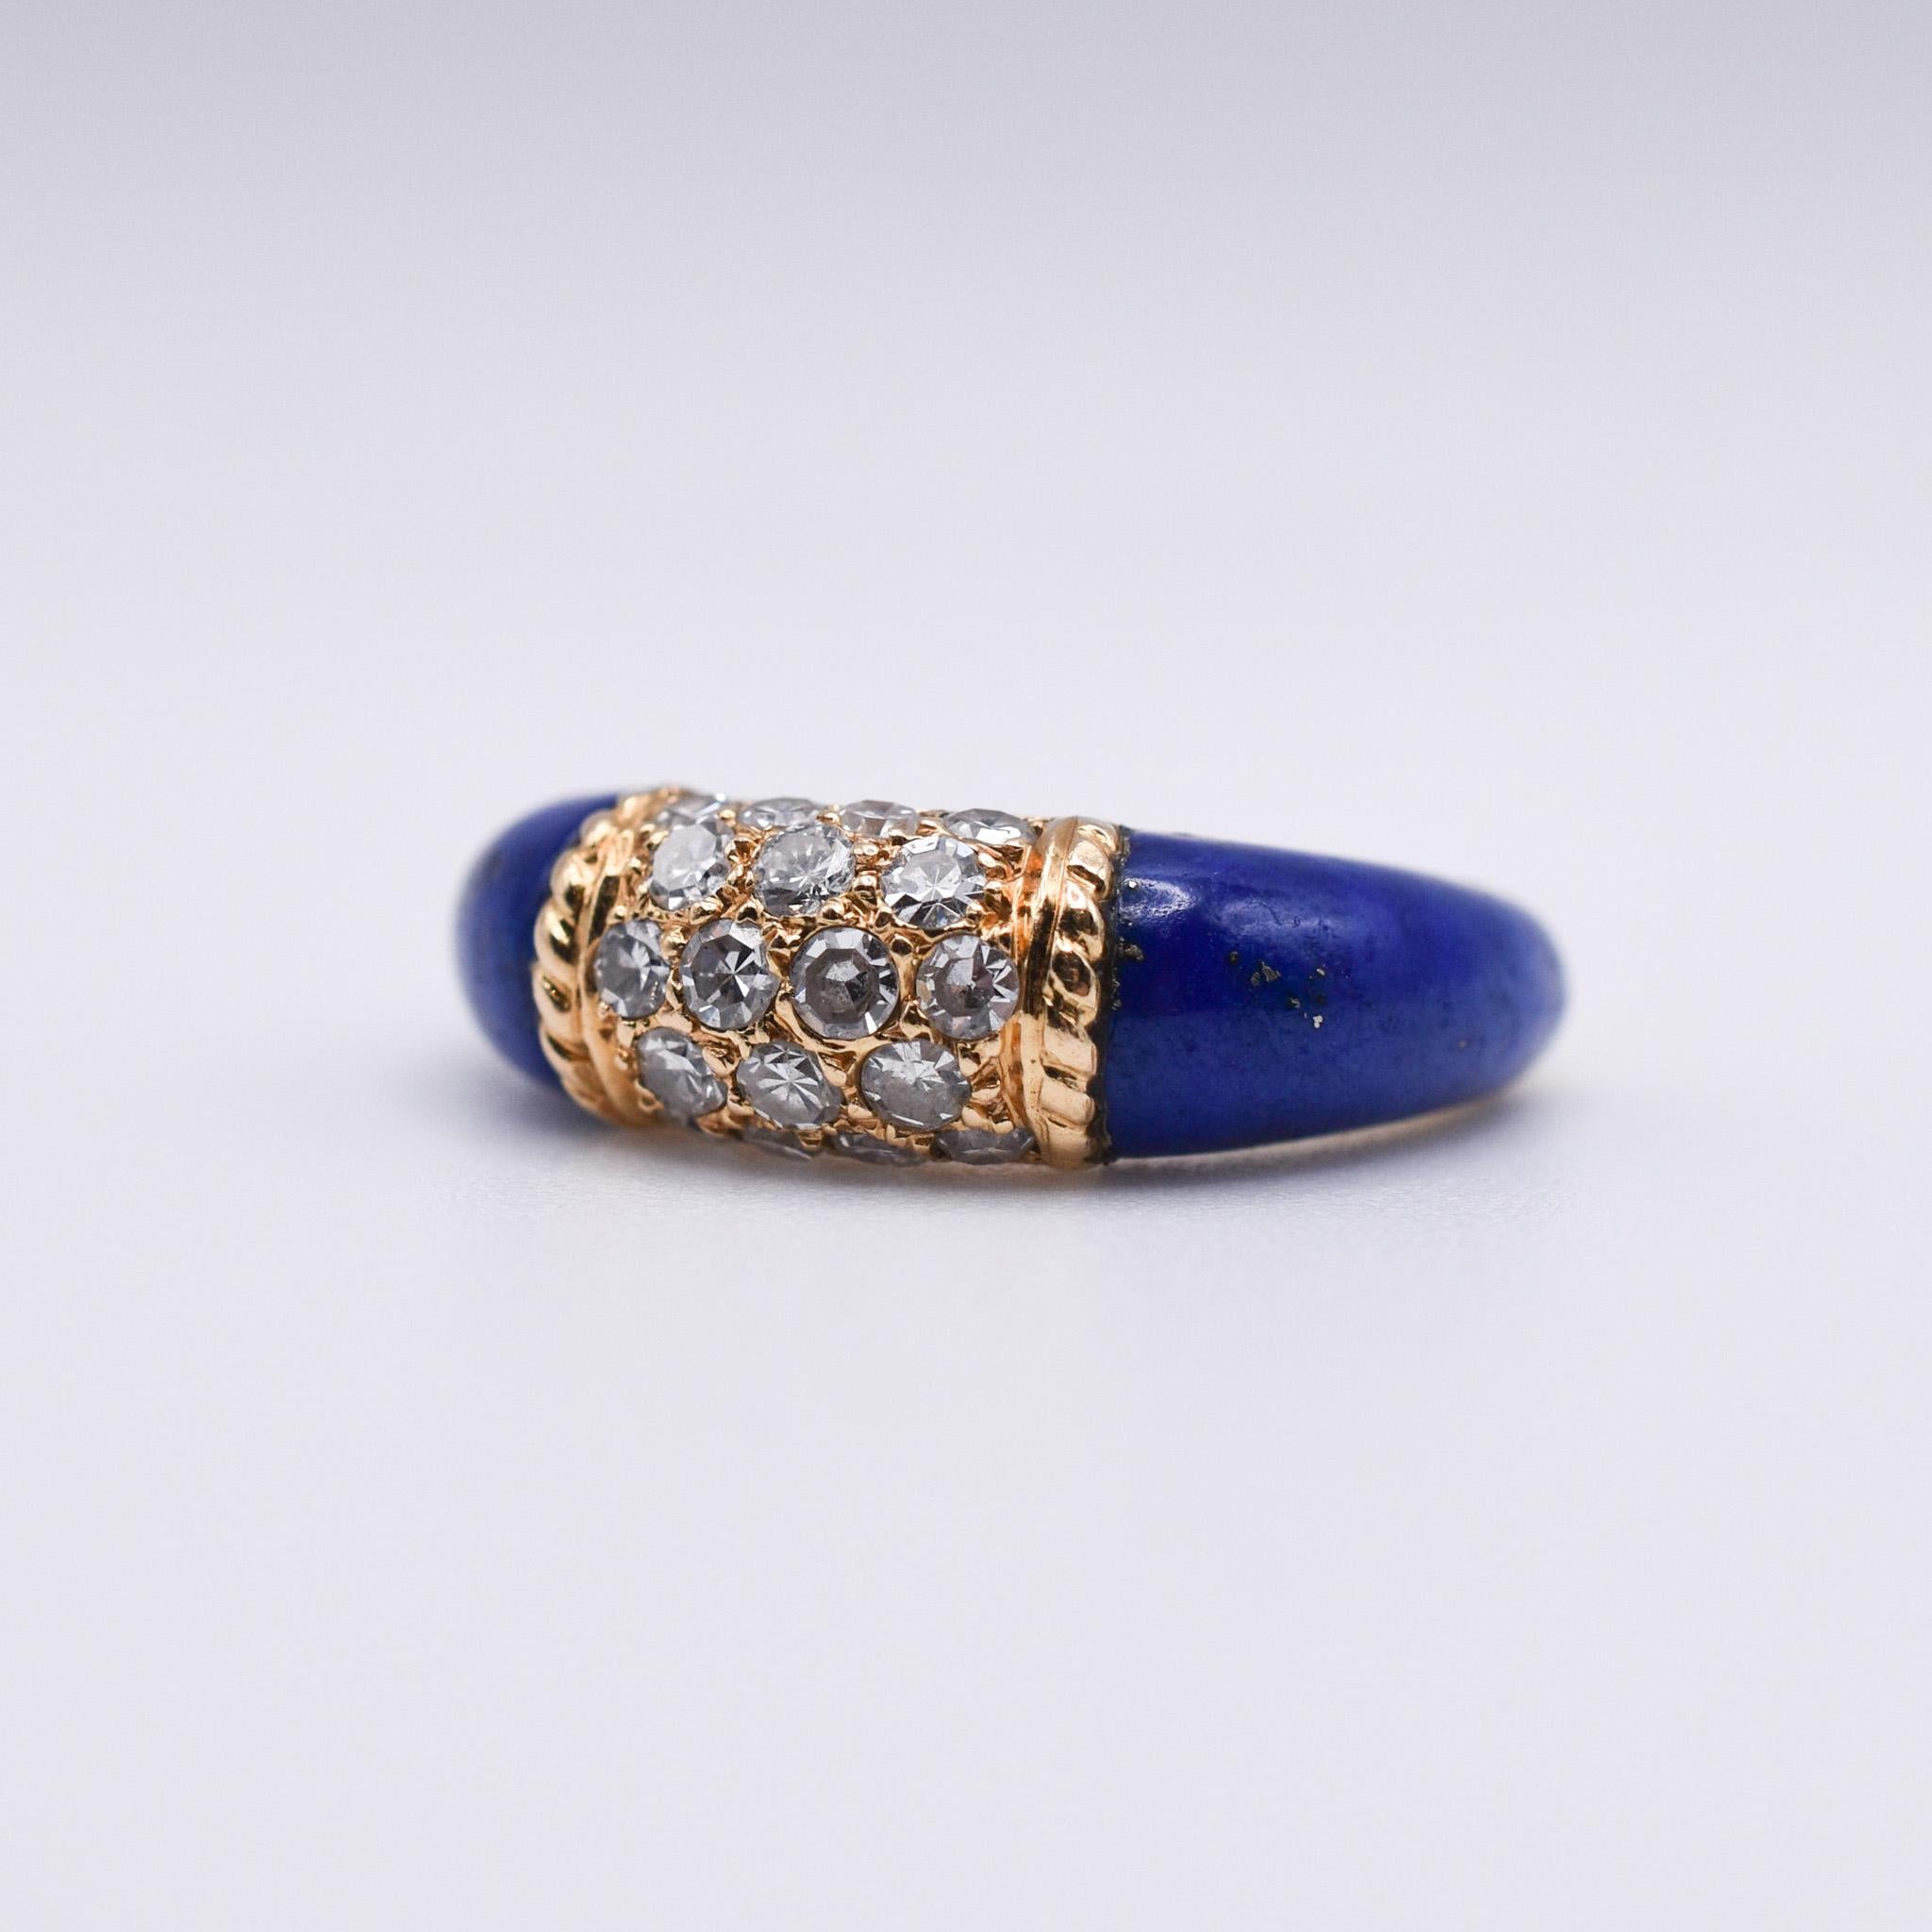 Van Cleef & Arpels Lapis Lazuli and Diamond ‘Philippine’ Ring in 18k Yellow Gold.
Made in France, circa 1960.
Signed VCA and numbered.

Ring size: UK K